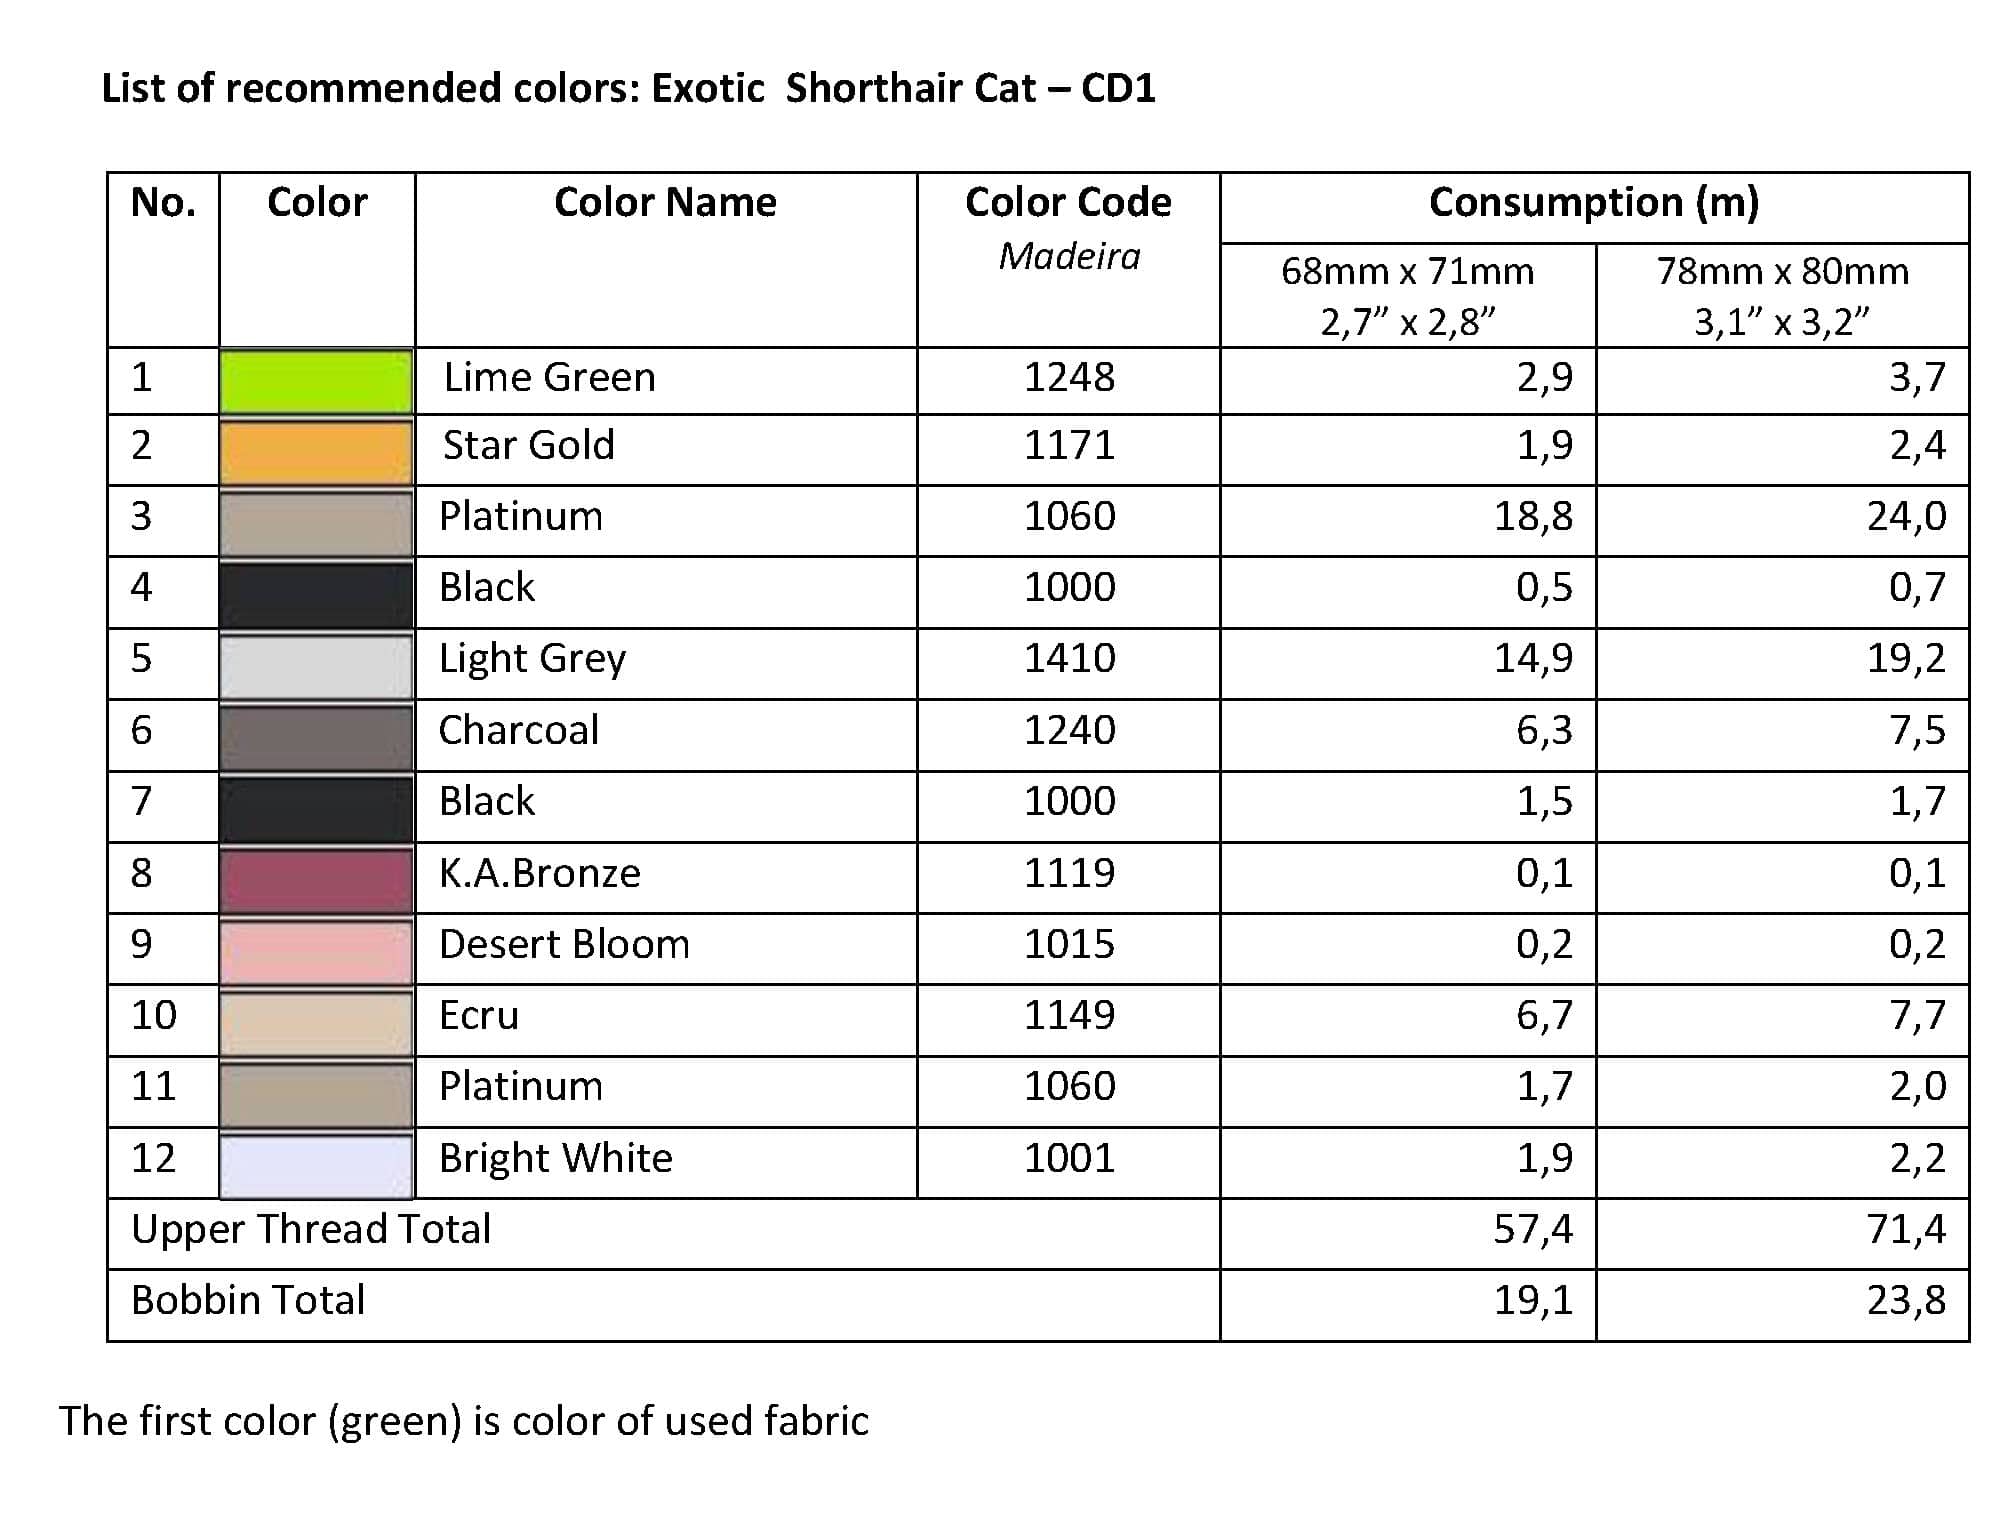 List of Recommended Colors - Exotic Shorthair Cat CD1